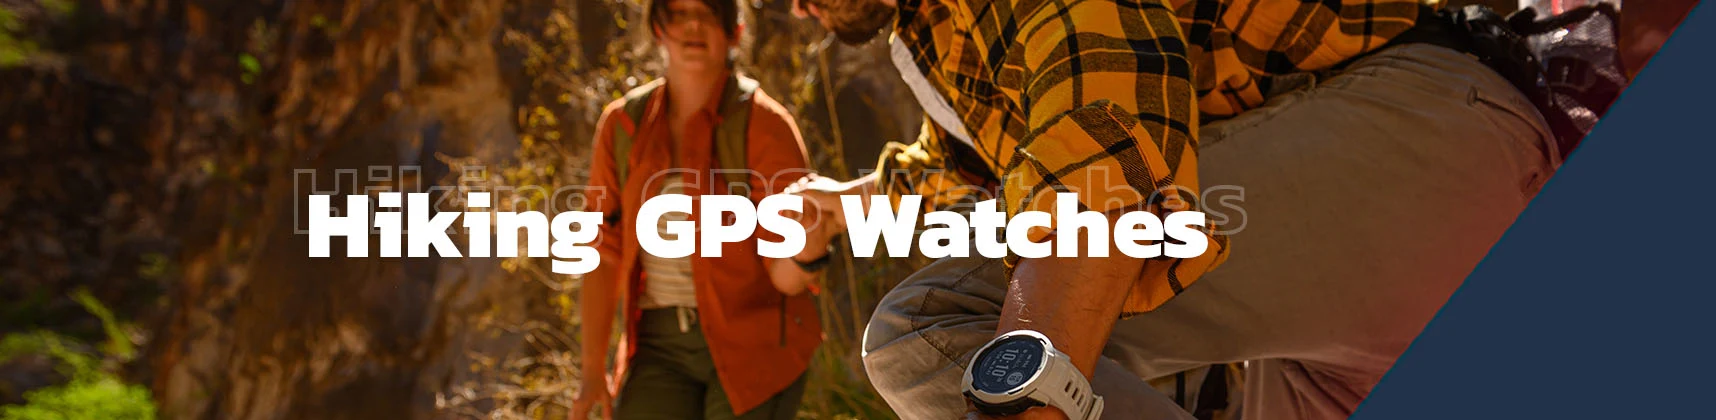 Hiking  & Outdoor GPS Watches & Location Trackers at PlayBetter.com